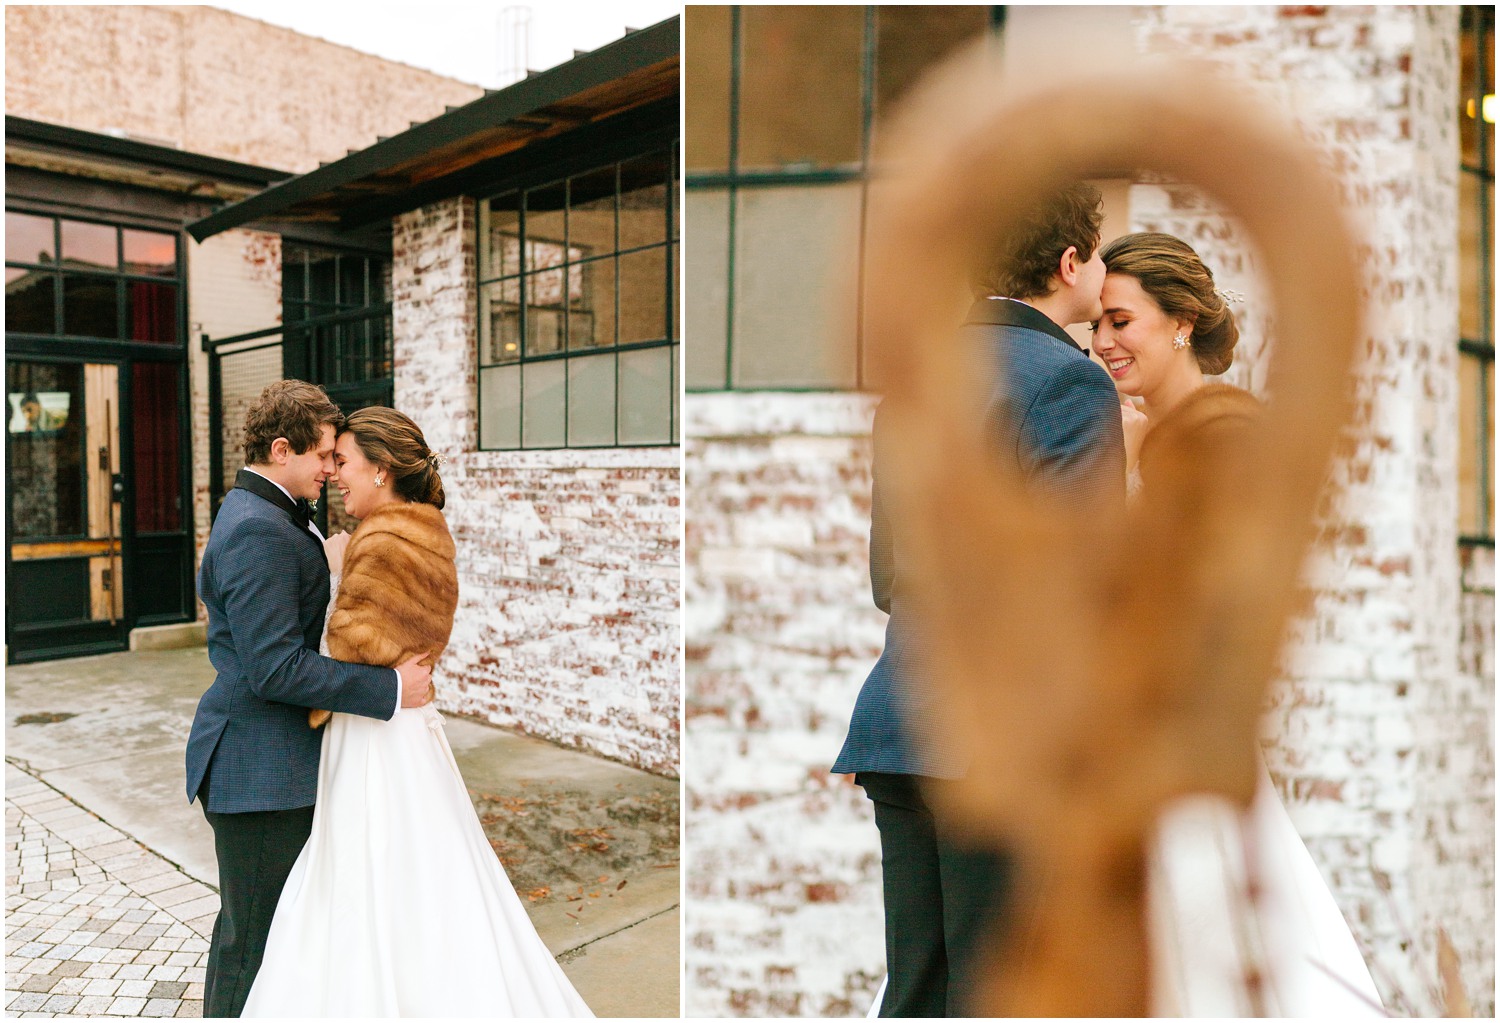 Chelsea Renay Photography photographs newly wed bride and groom in NC